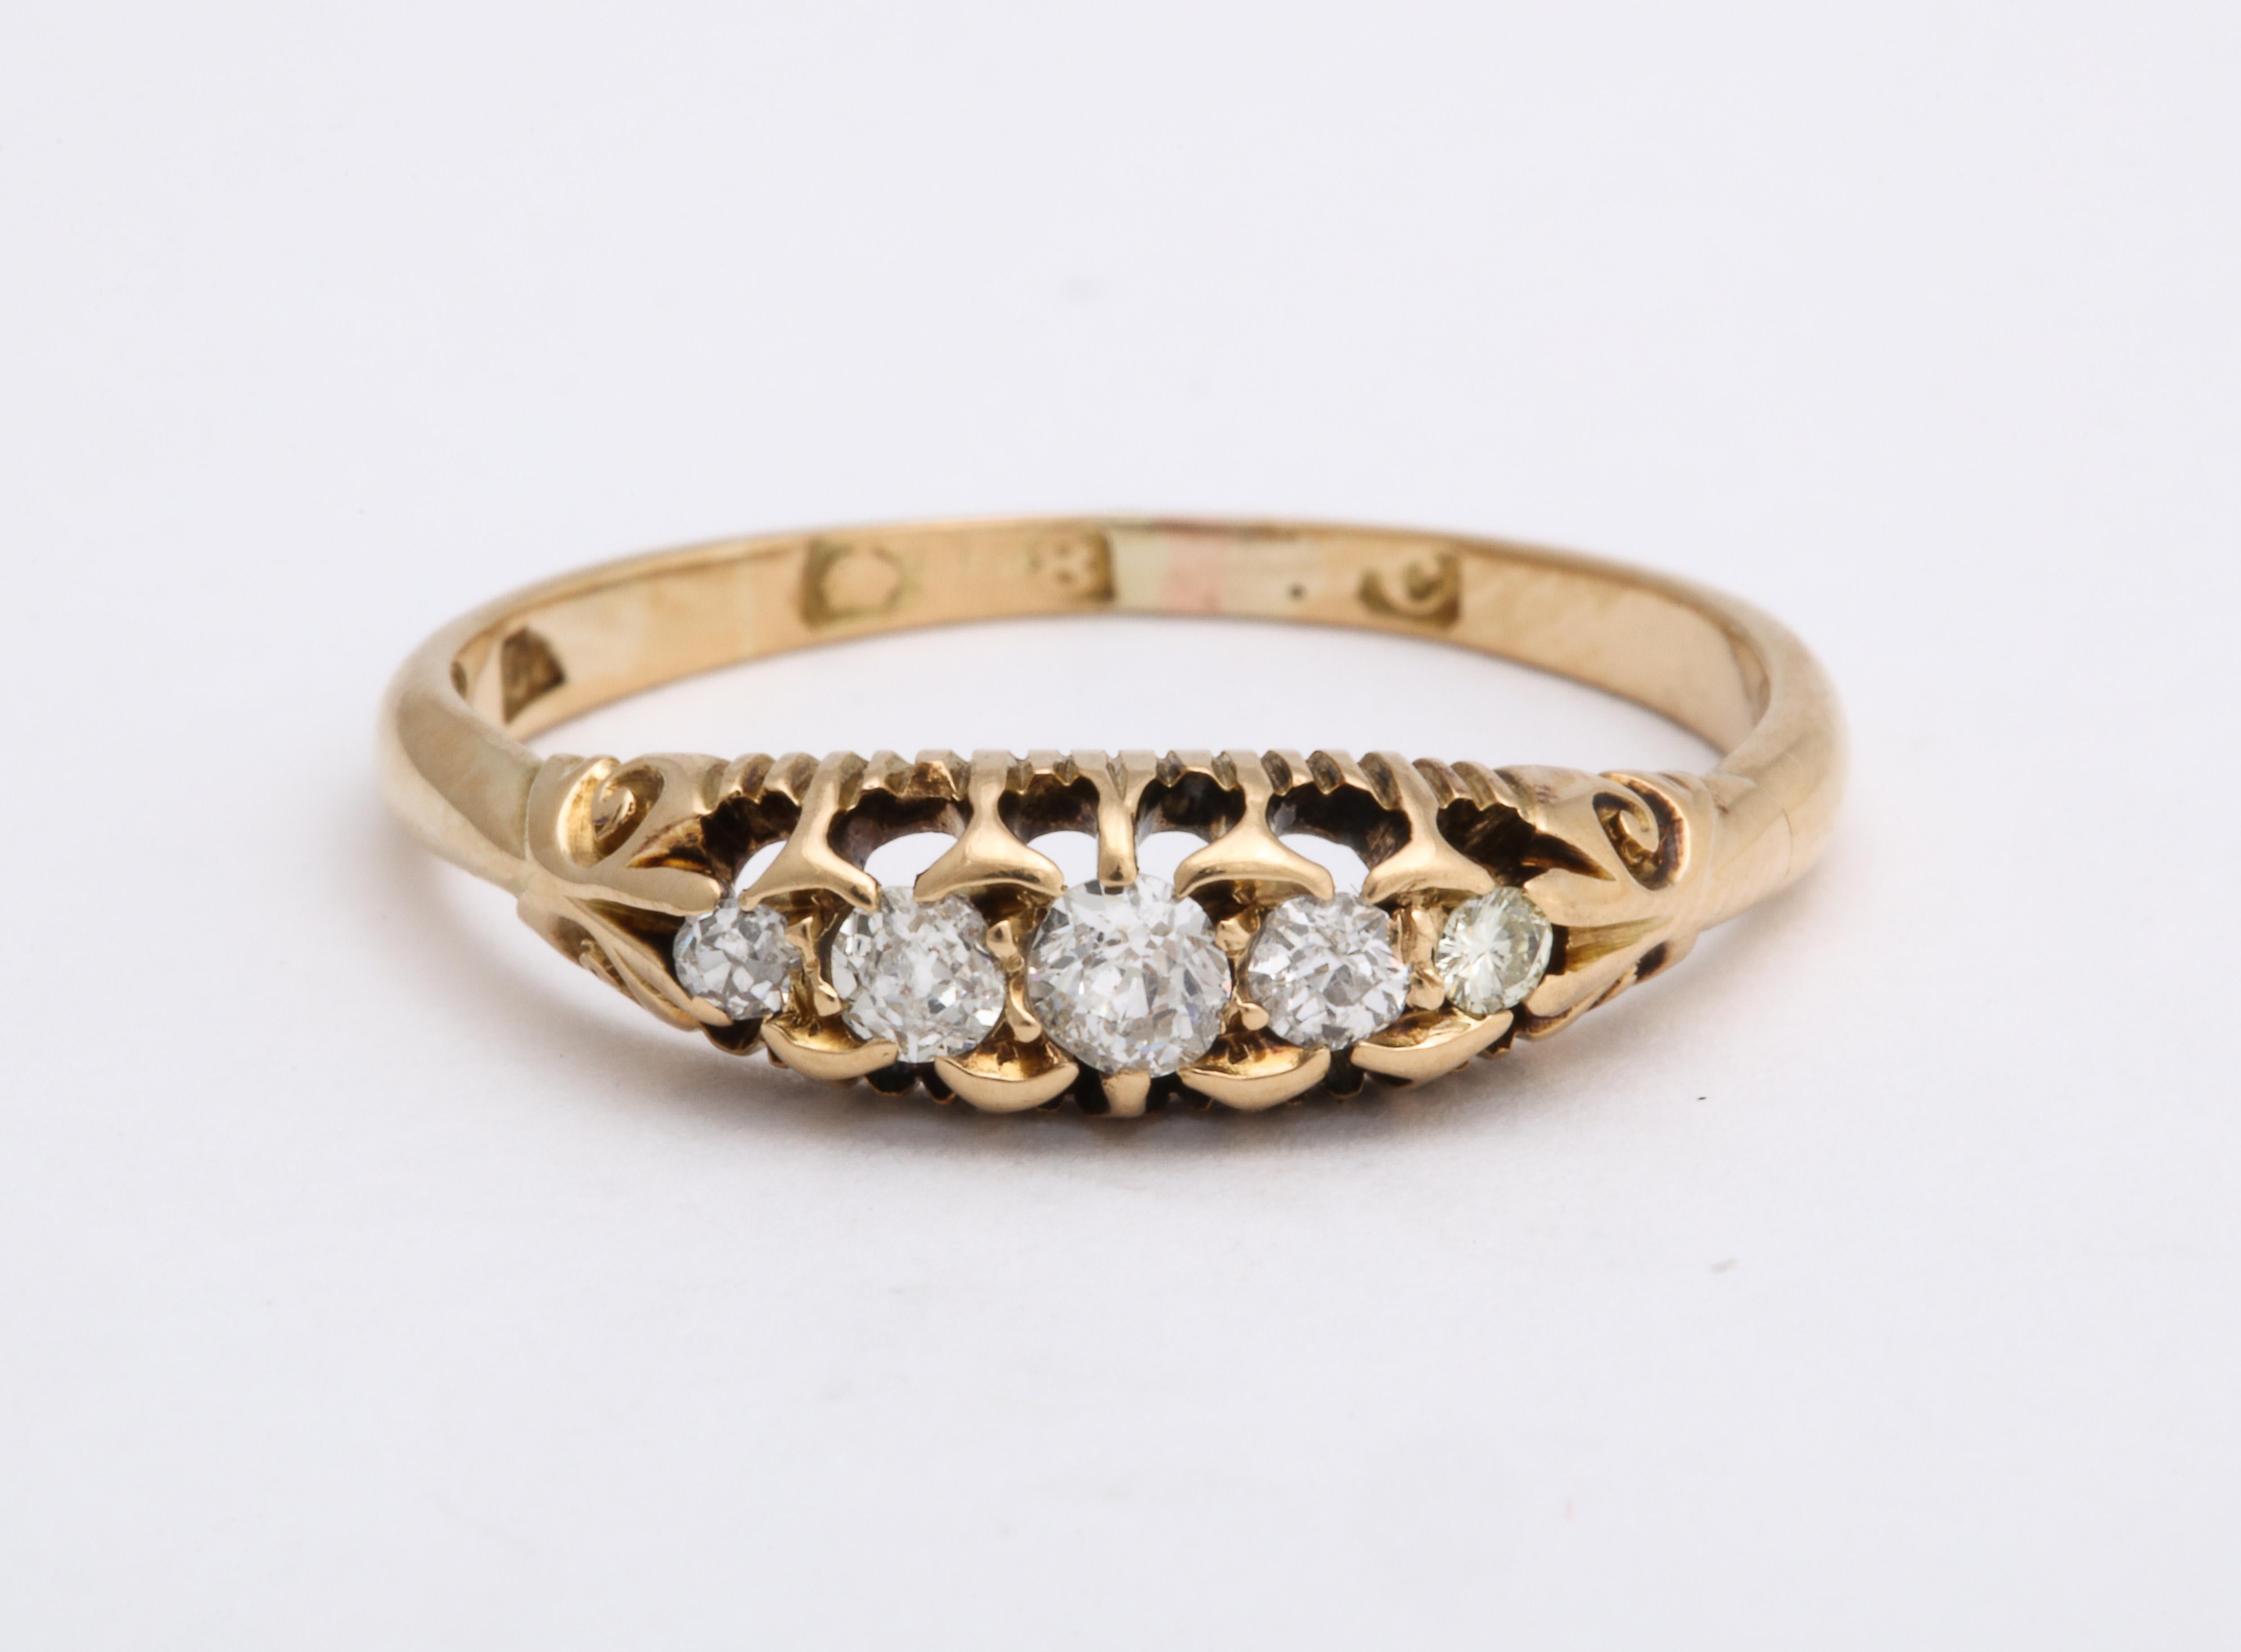 Antique Cushion Cut English 18k Gold Diamond Five Stone Ring, Mid-20th Century For Sale